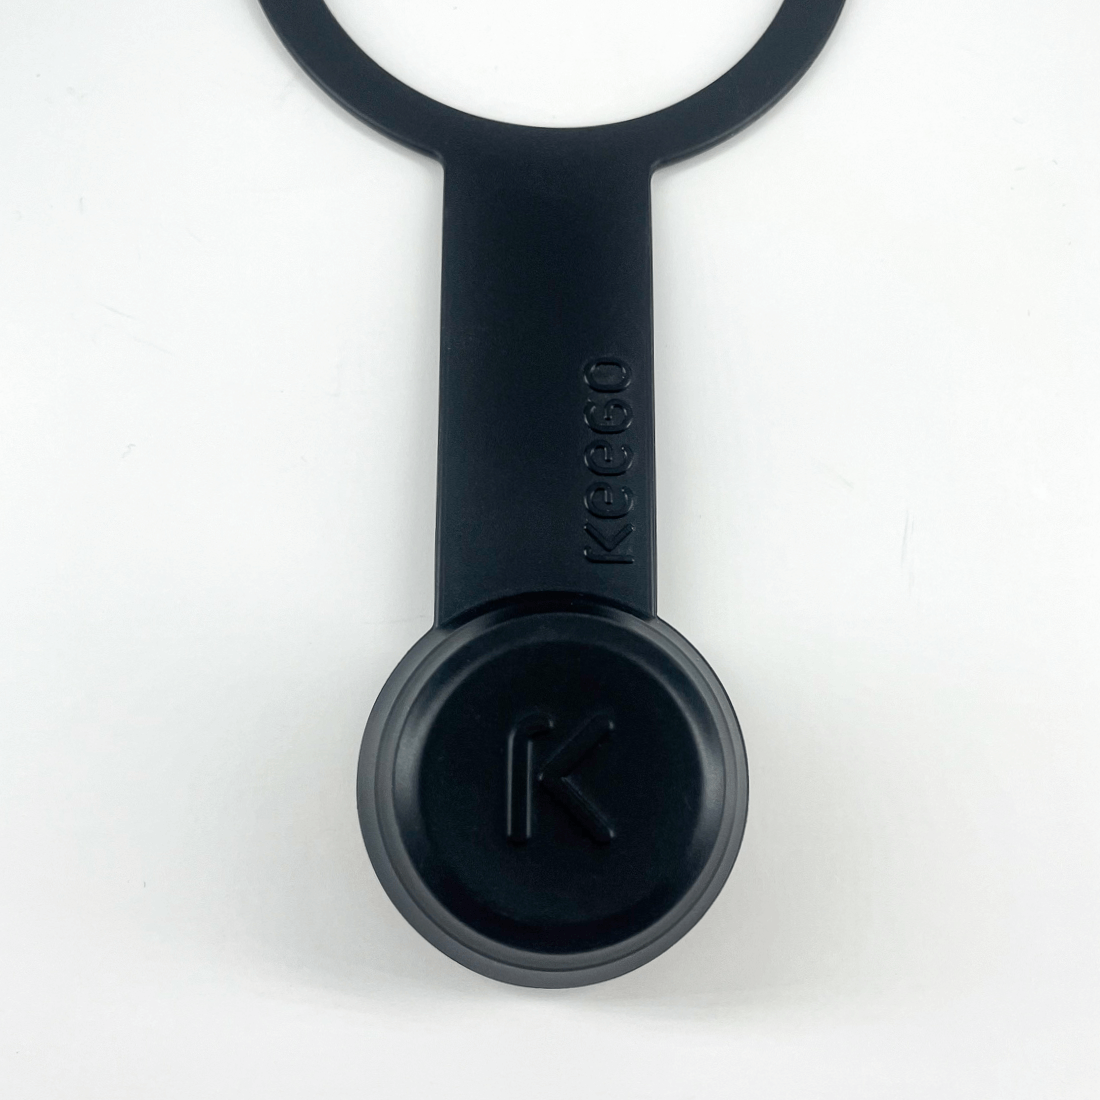 Extra Flow Cap | Accessories for KEEGO drinking bottle